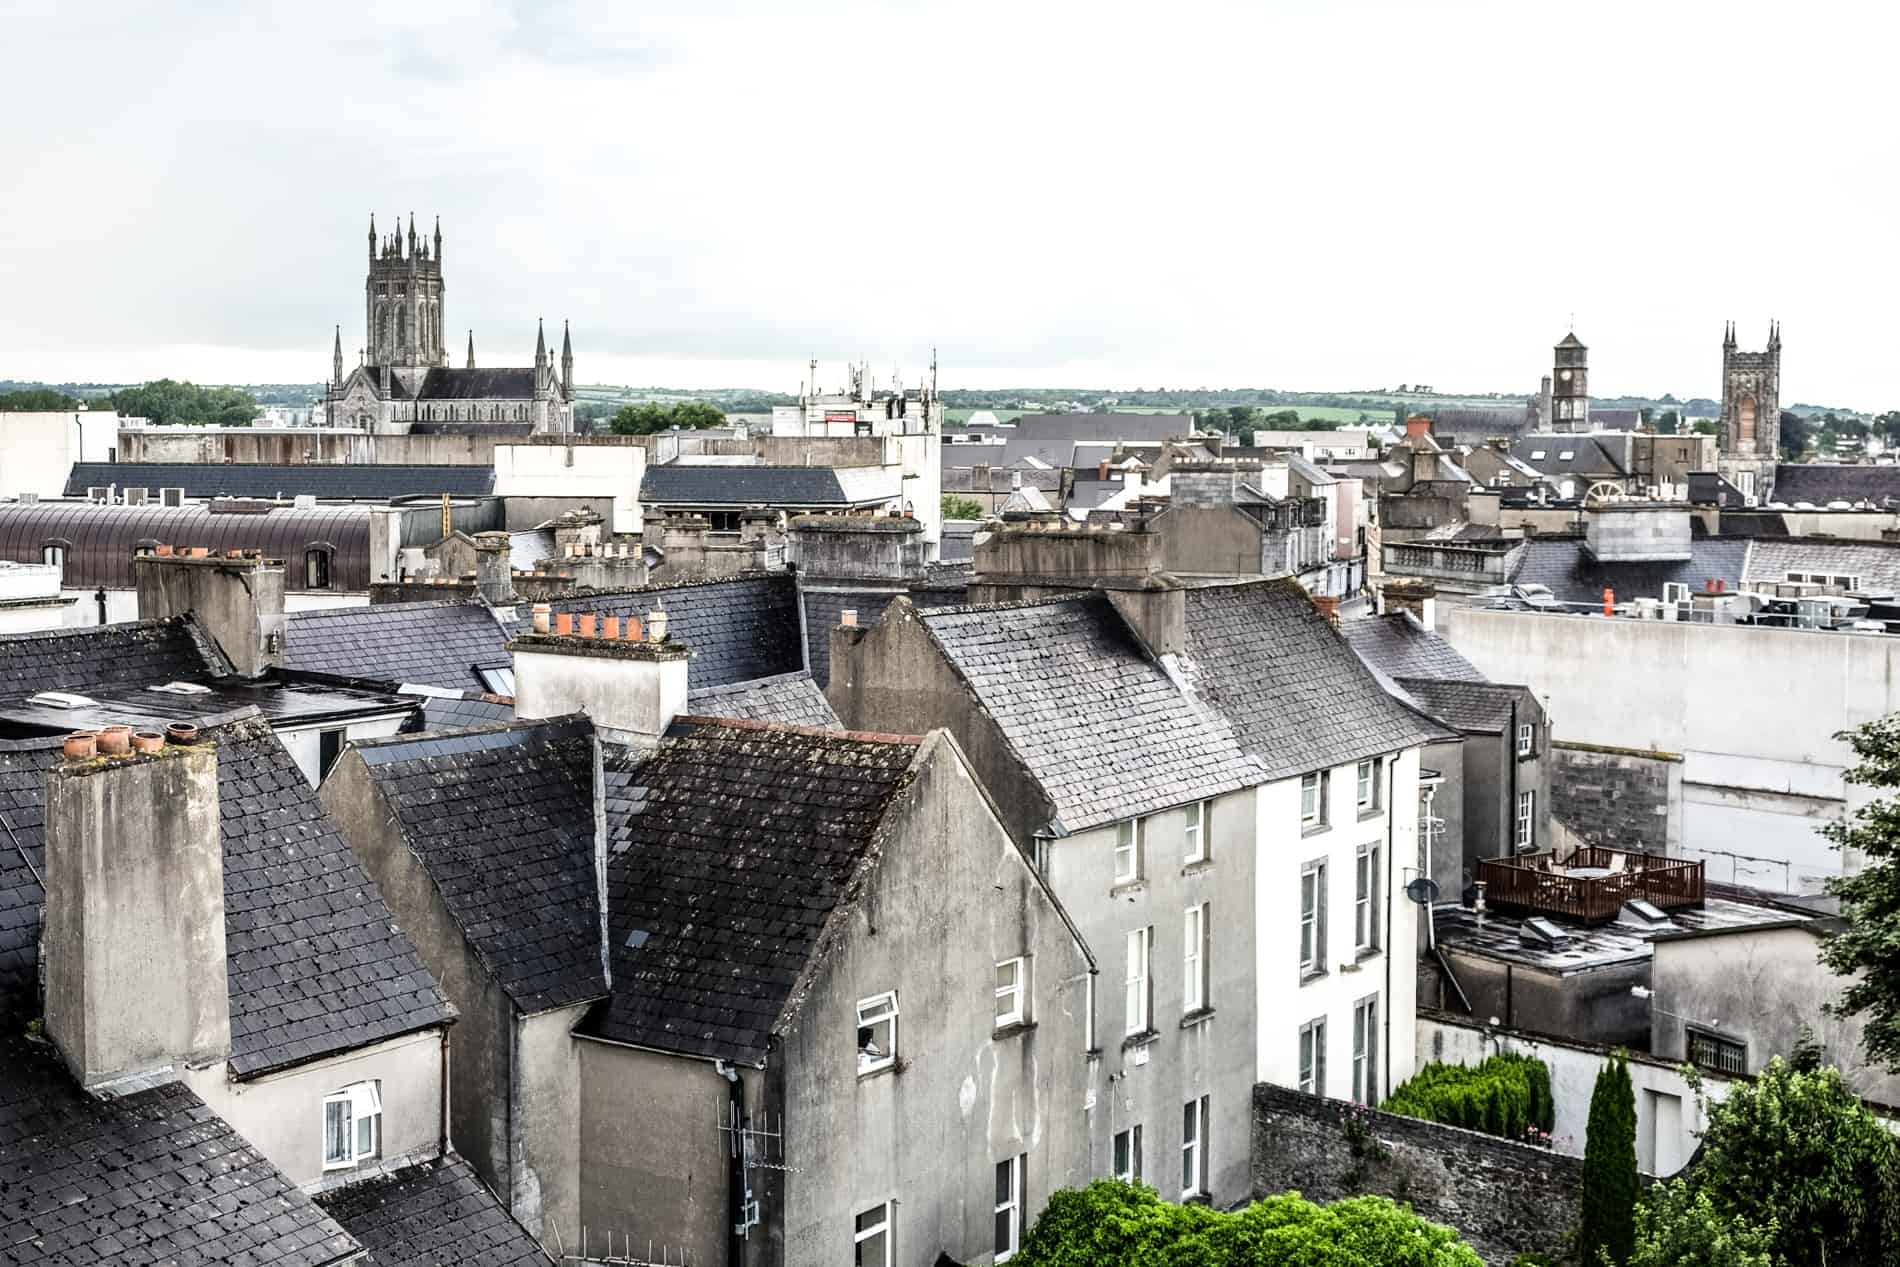 Rooftop view of Kilkenny, Ireland with its mix of medieval buildings, churches and cottages.